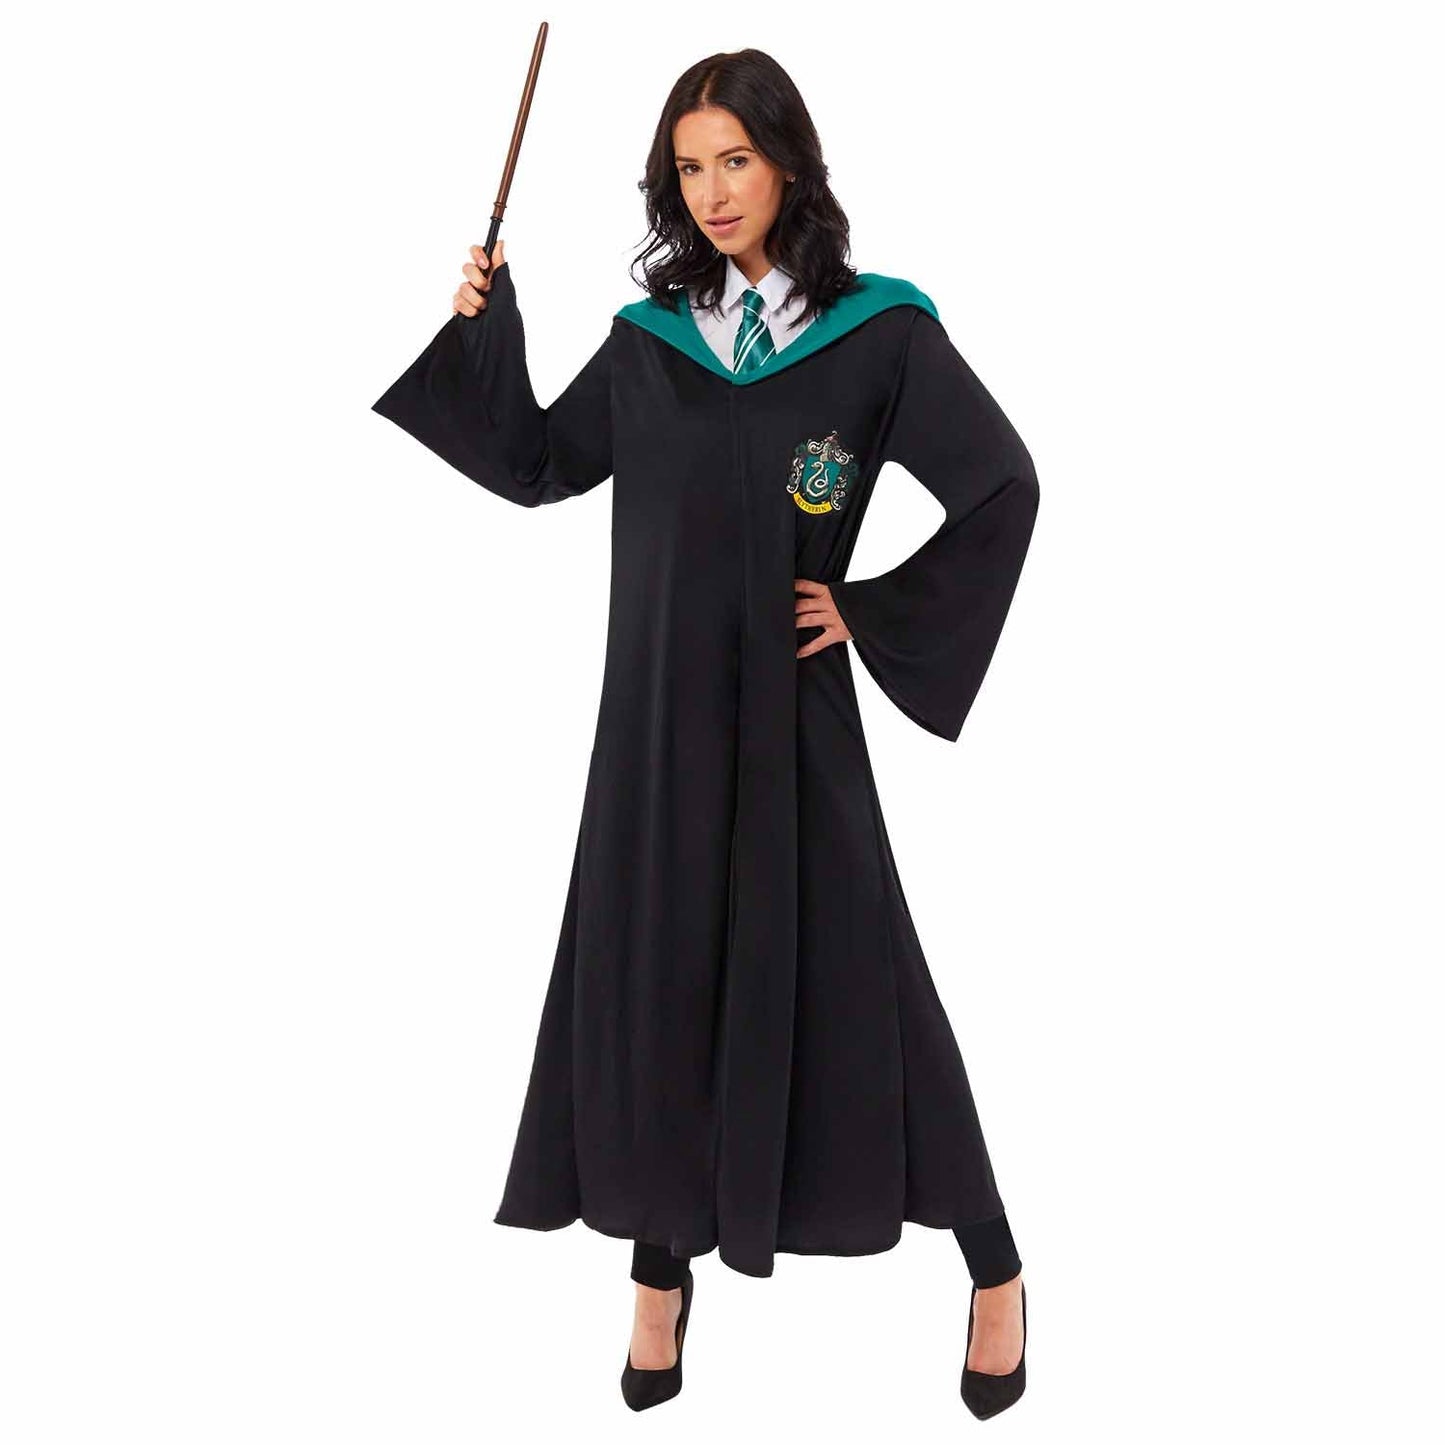 Adult Slytherin Robe and Wand